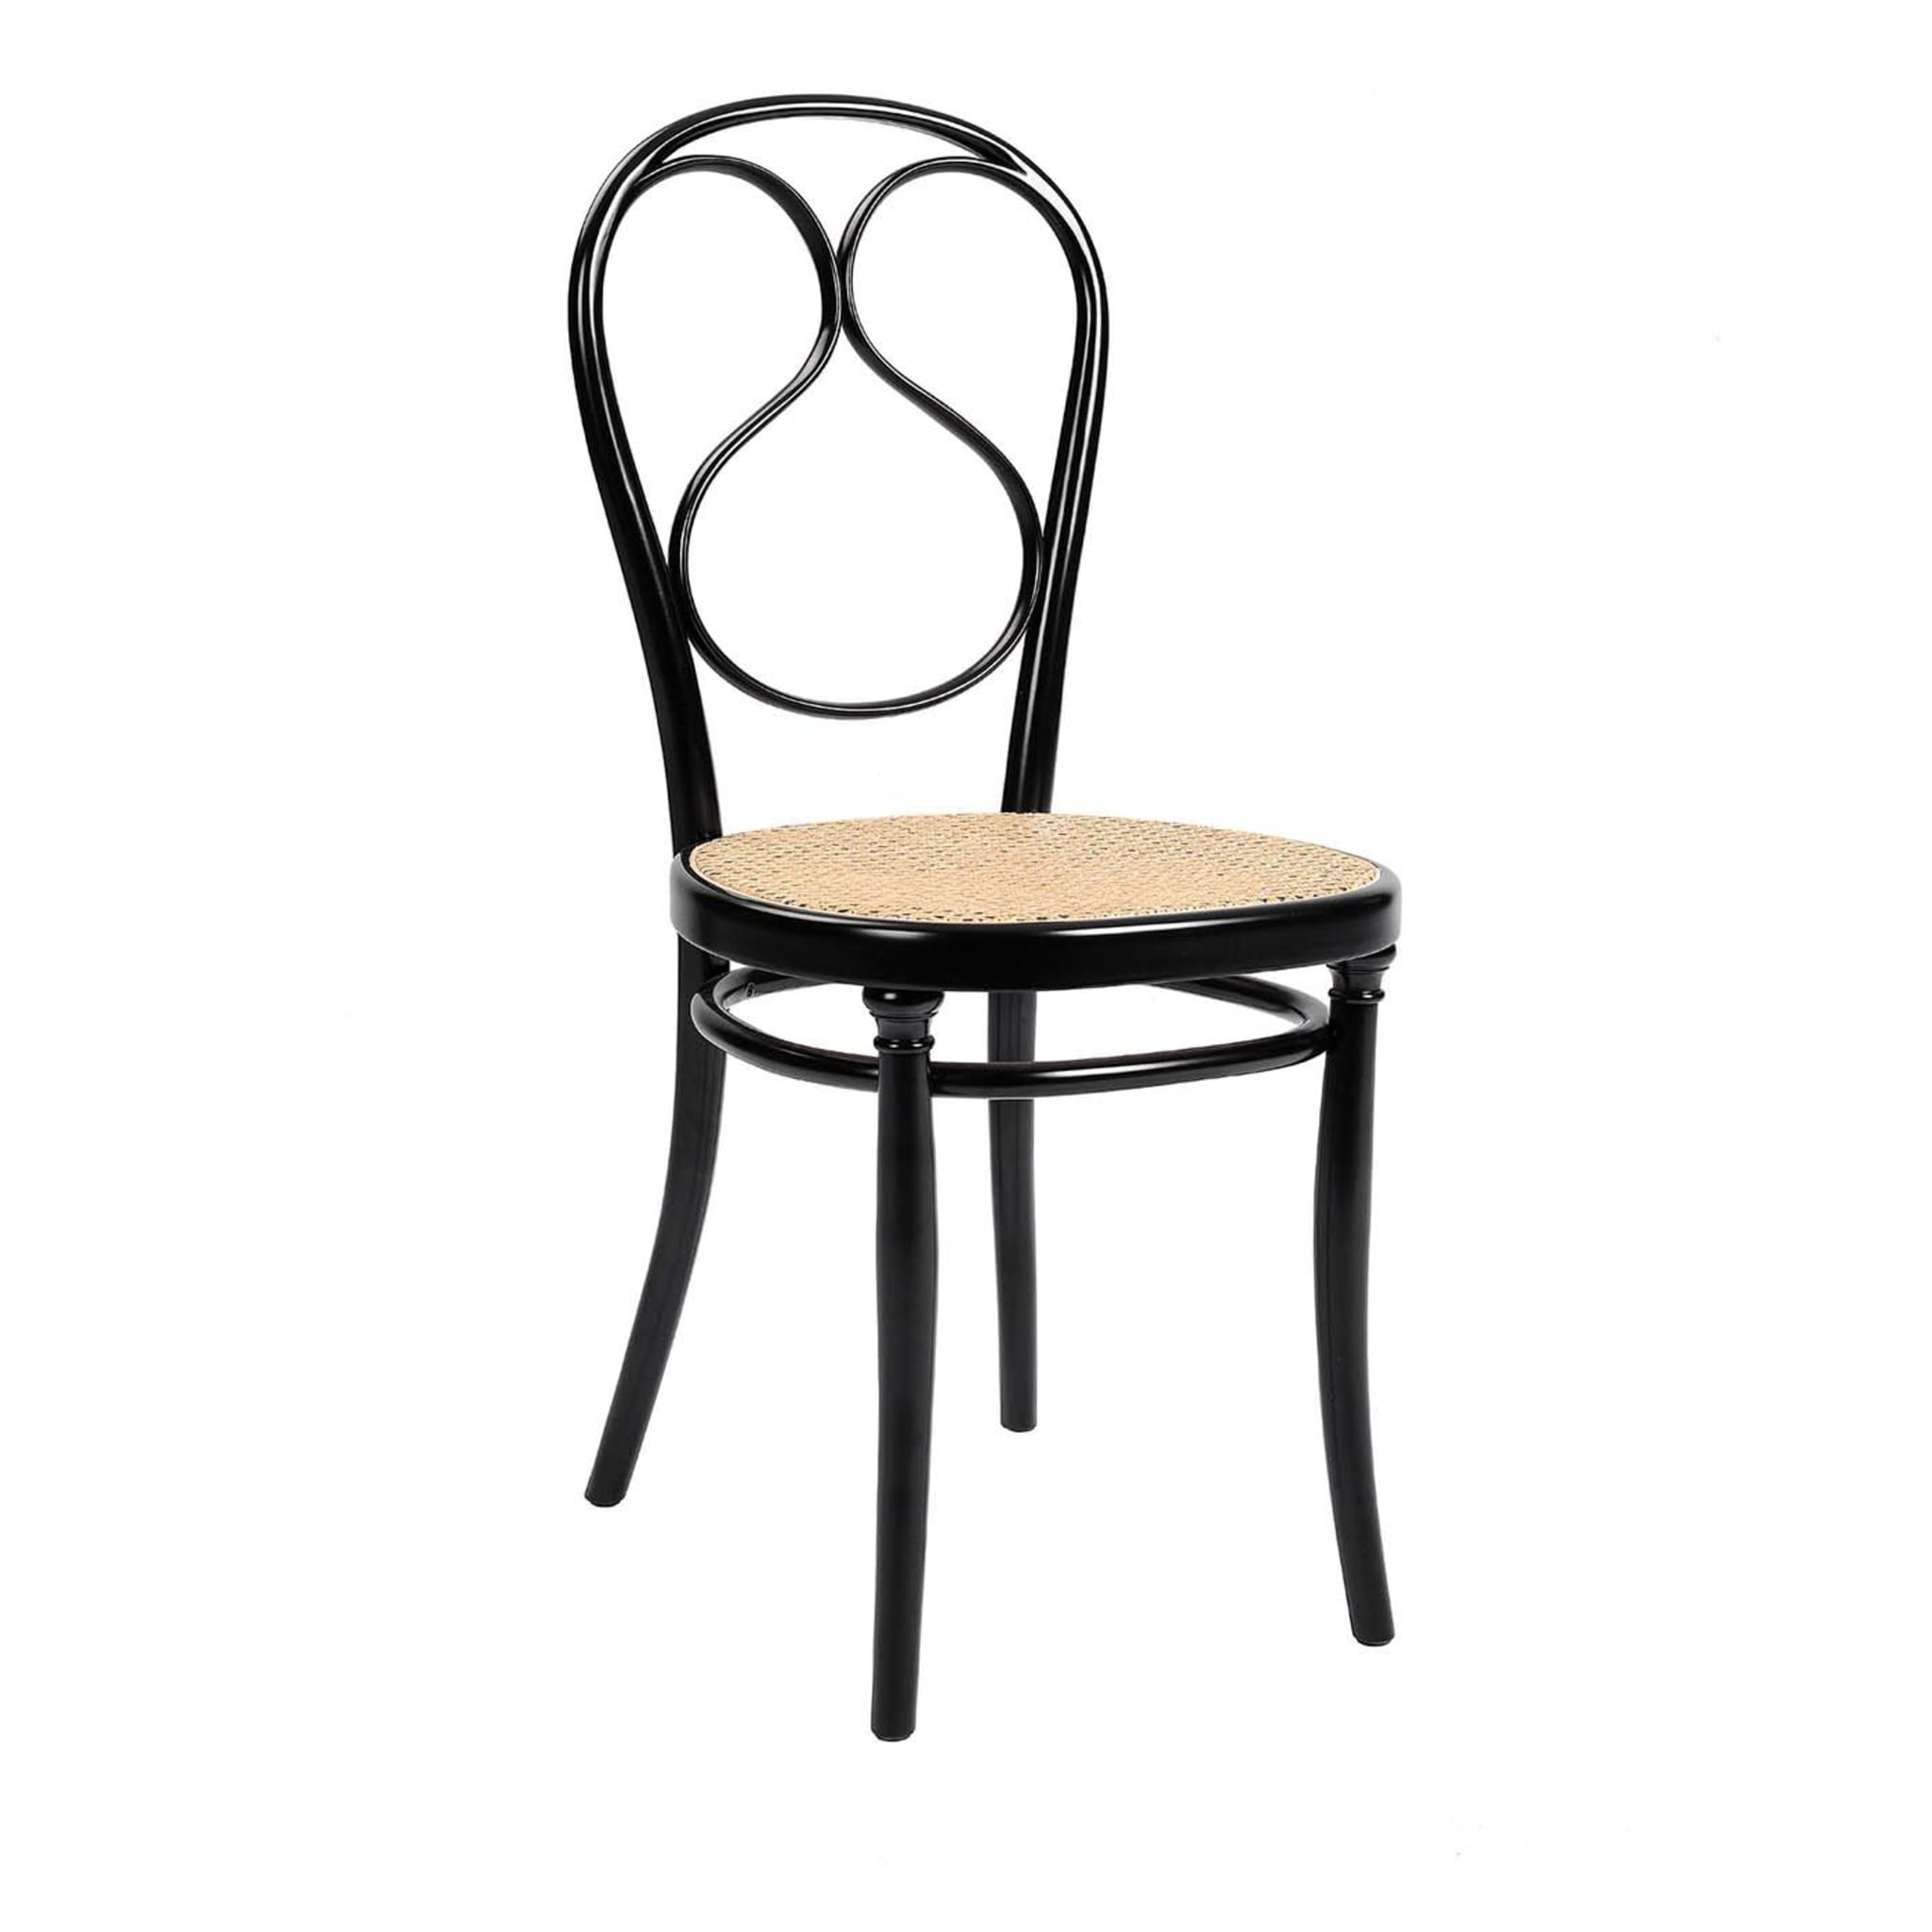 No. 1 Chair by Michael Thonet - Main view